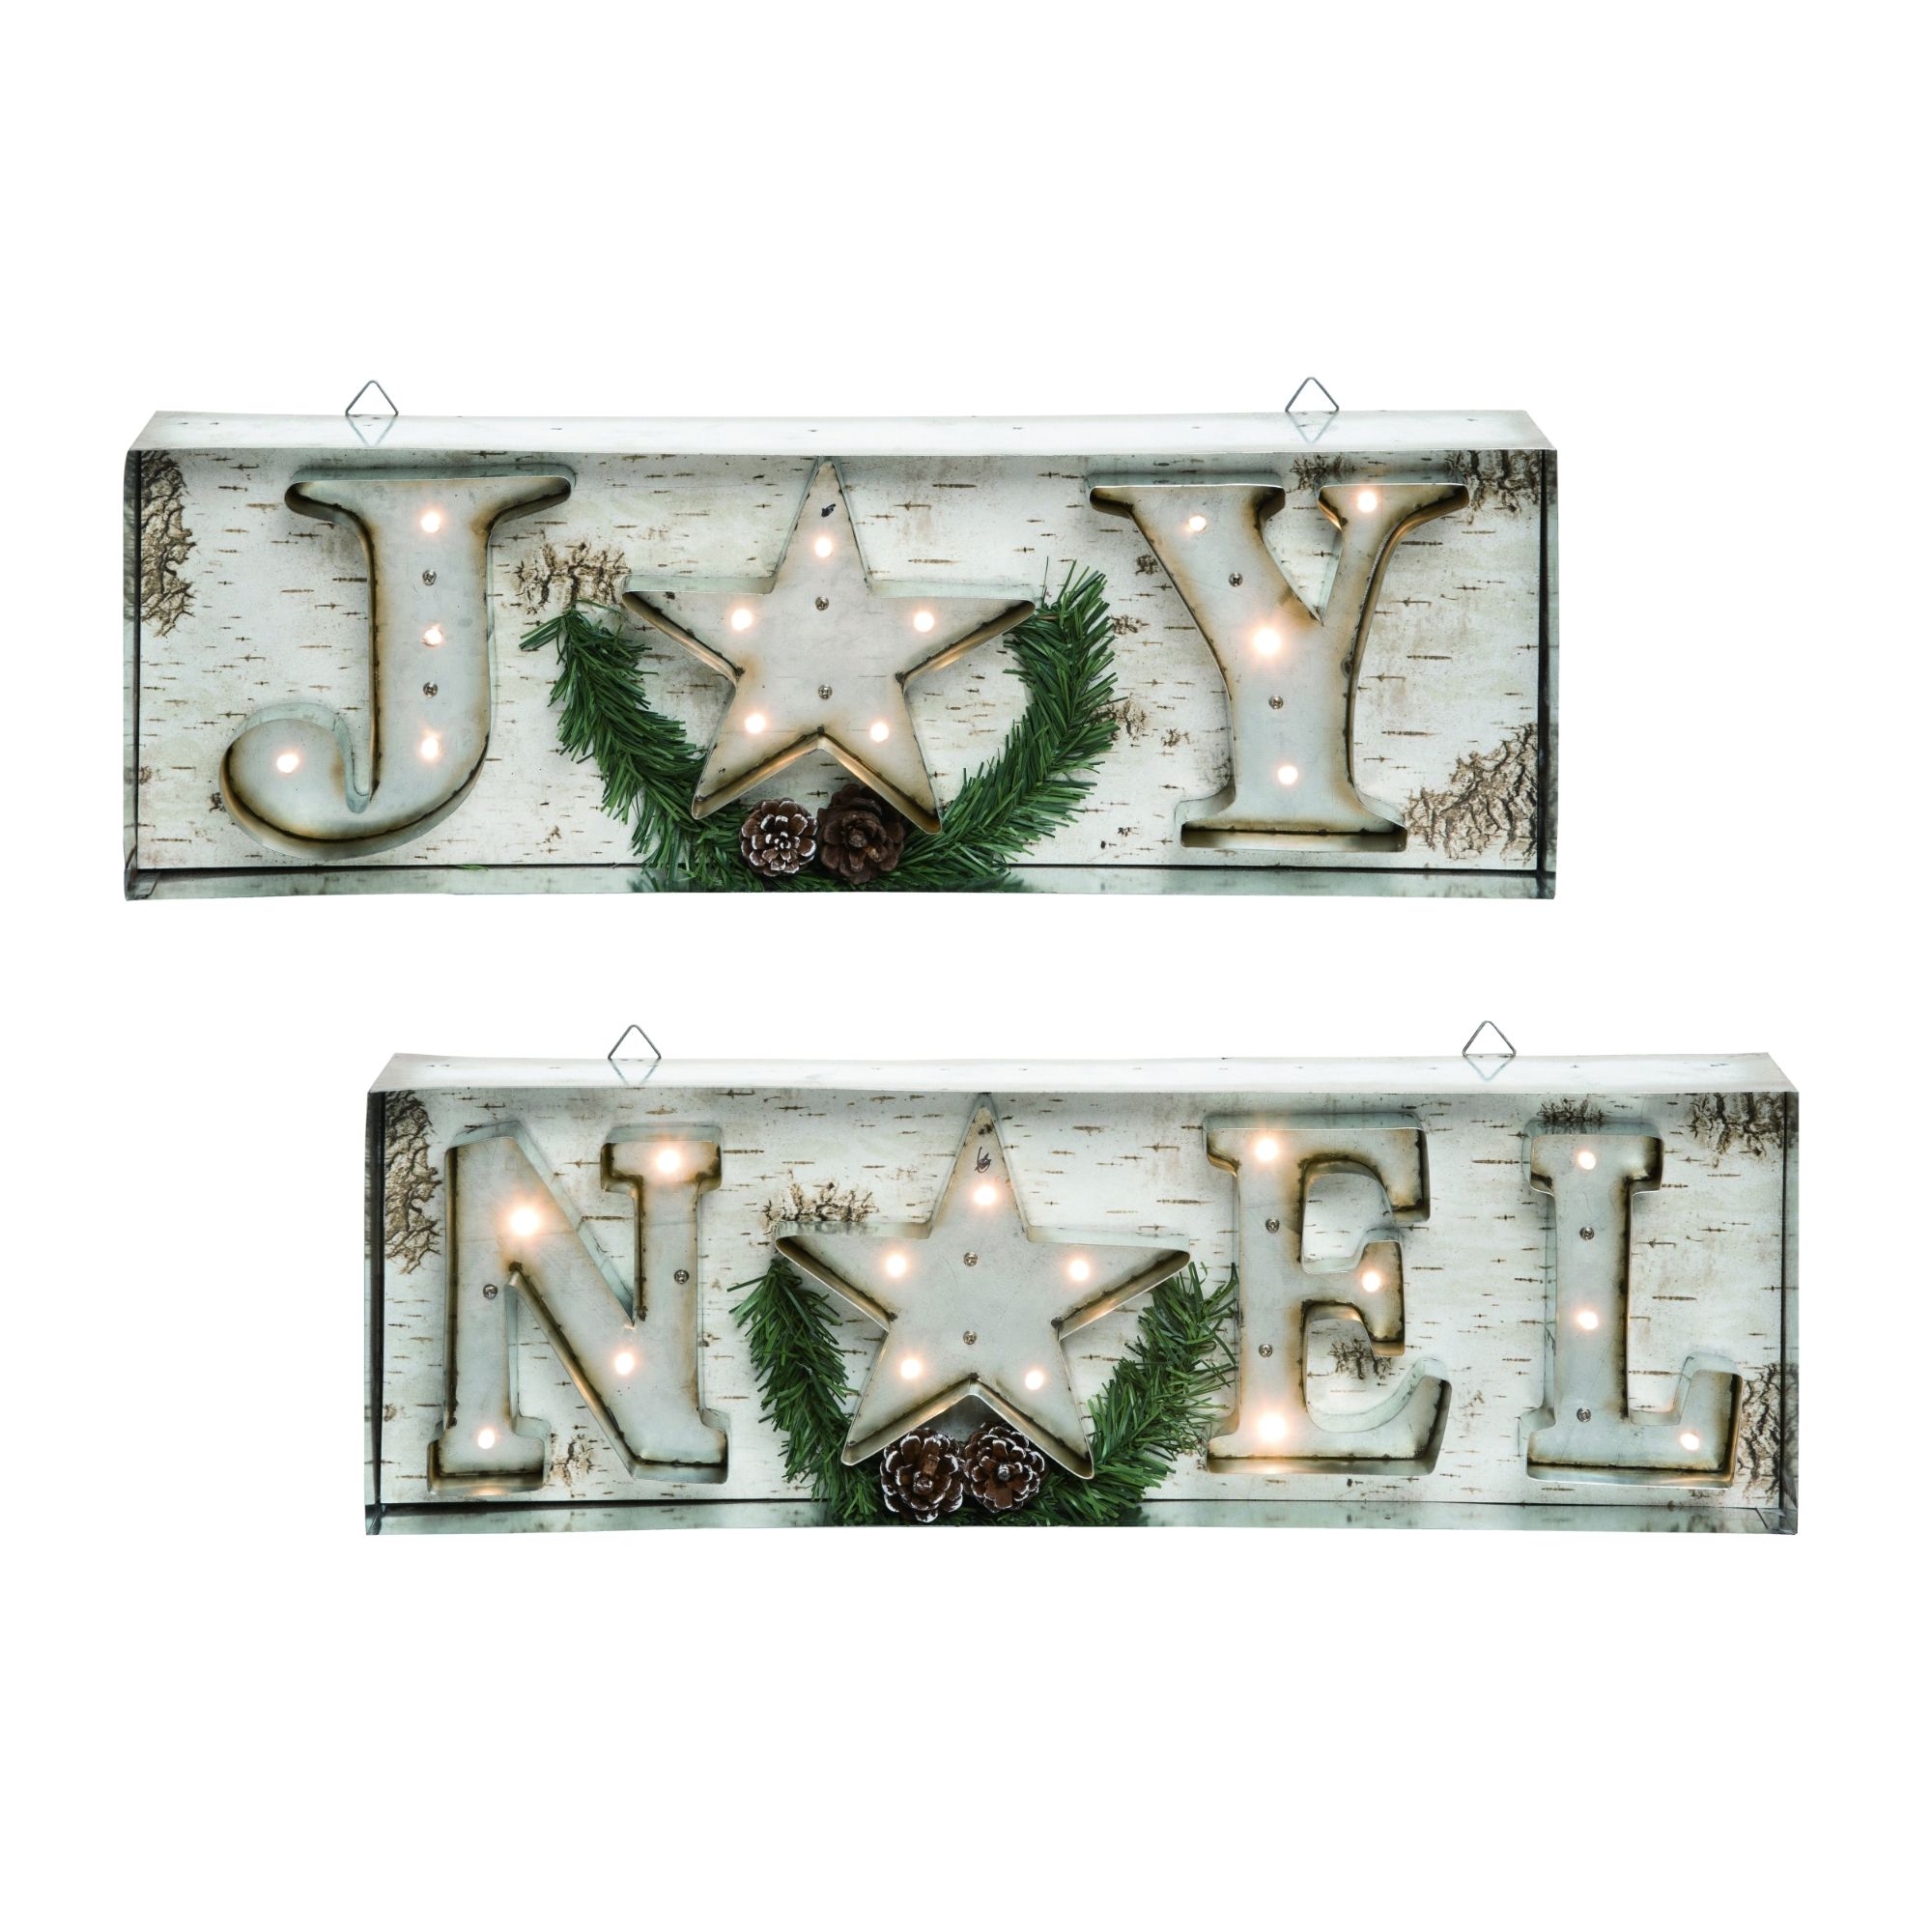 Contemporary Home Living Set of 2 Lighted "Joy Noel" Editorial Word Block Christmas Plaques 20"